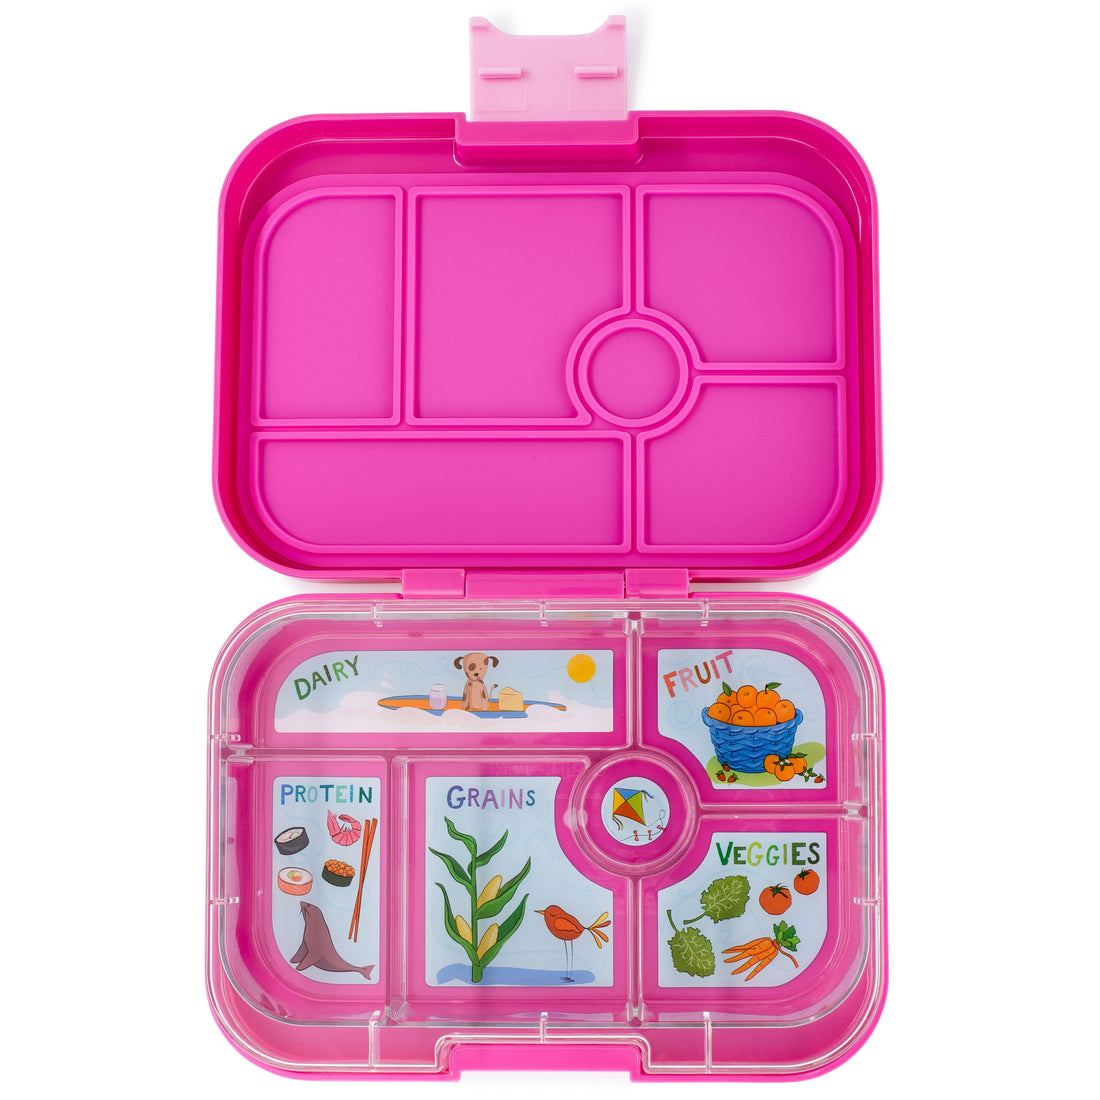 YUMBOX TAPAS 4 COMPARTMENT - baby enRoute